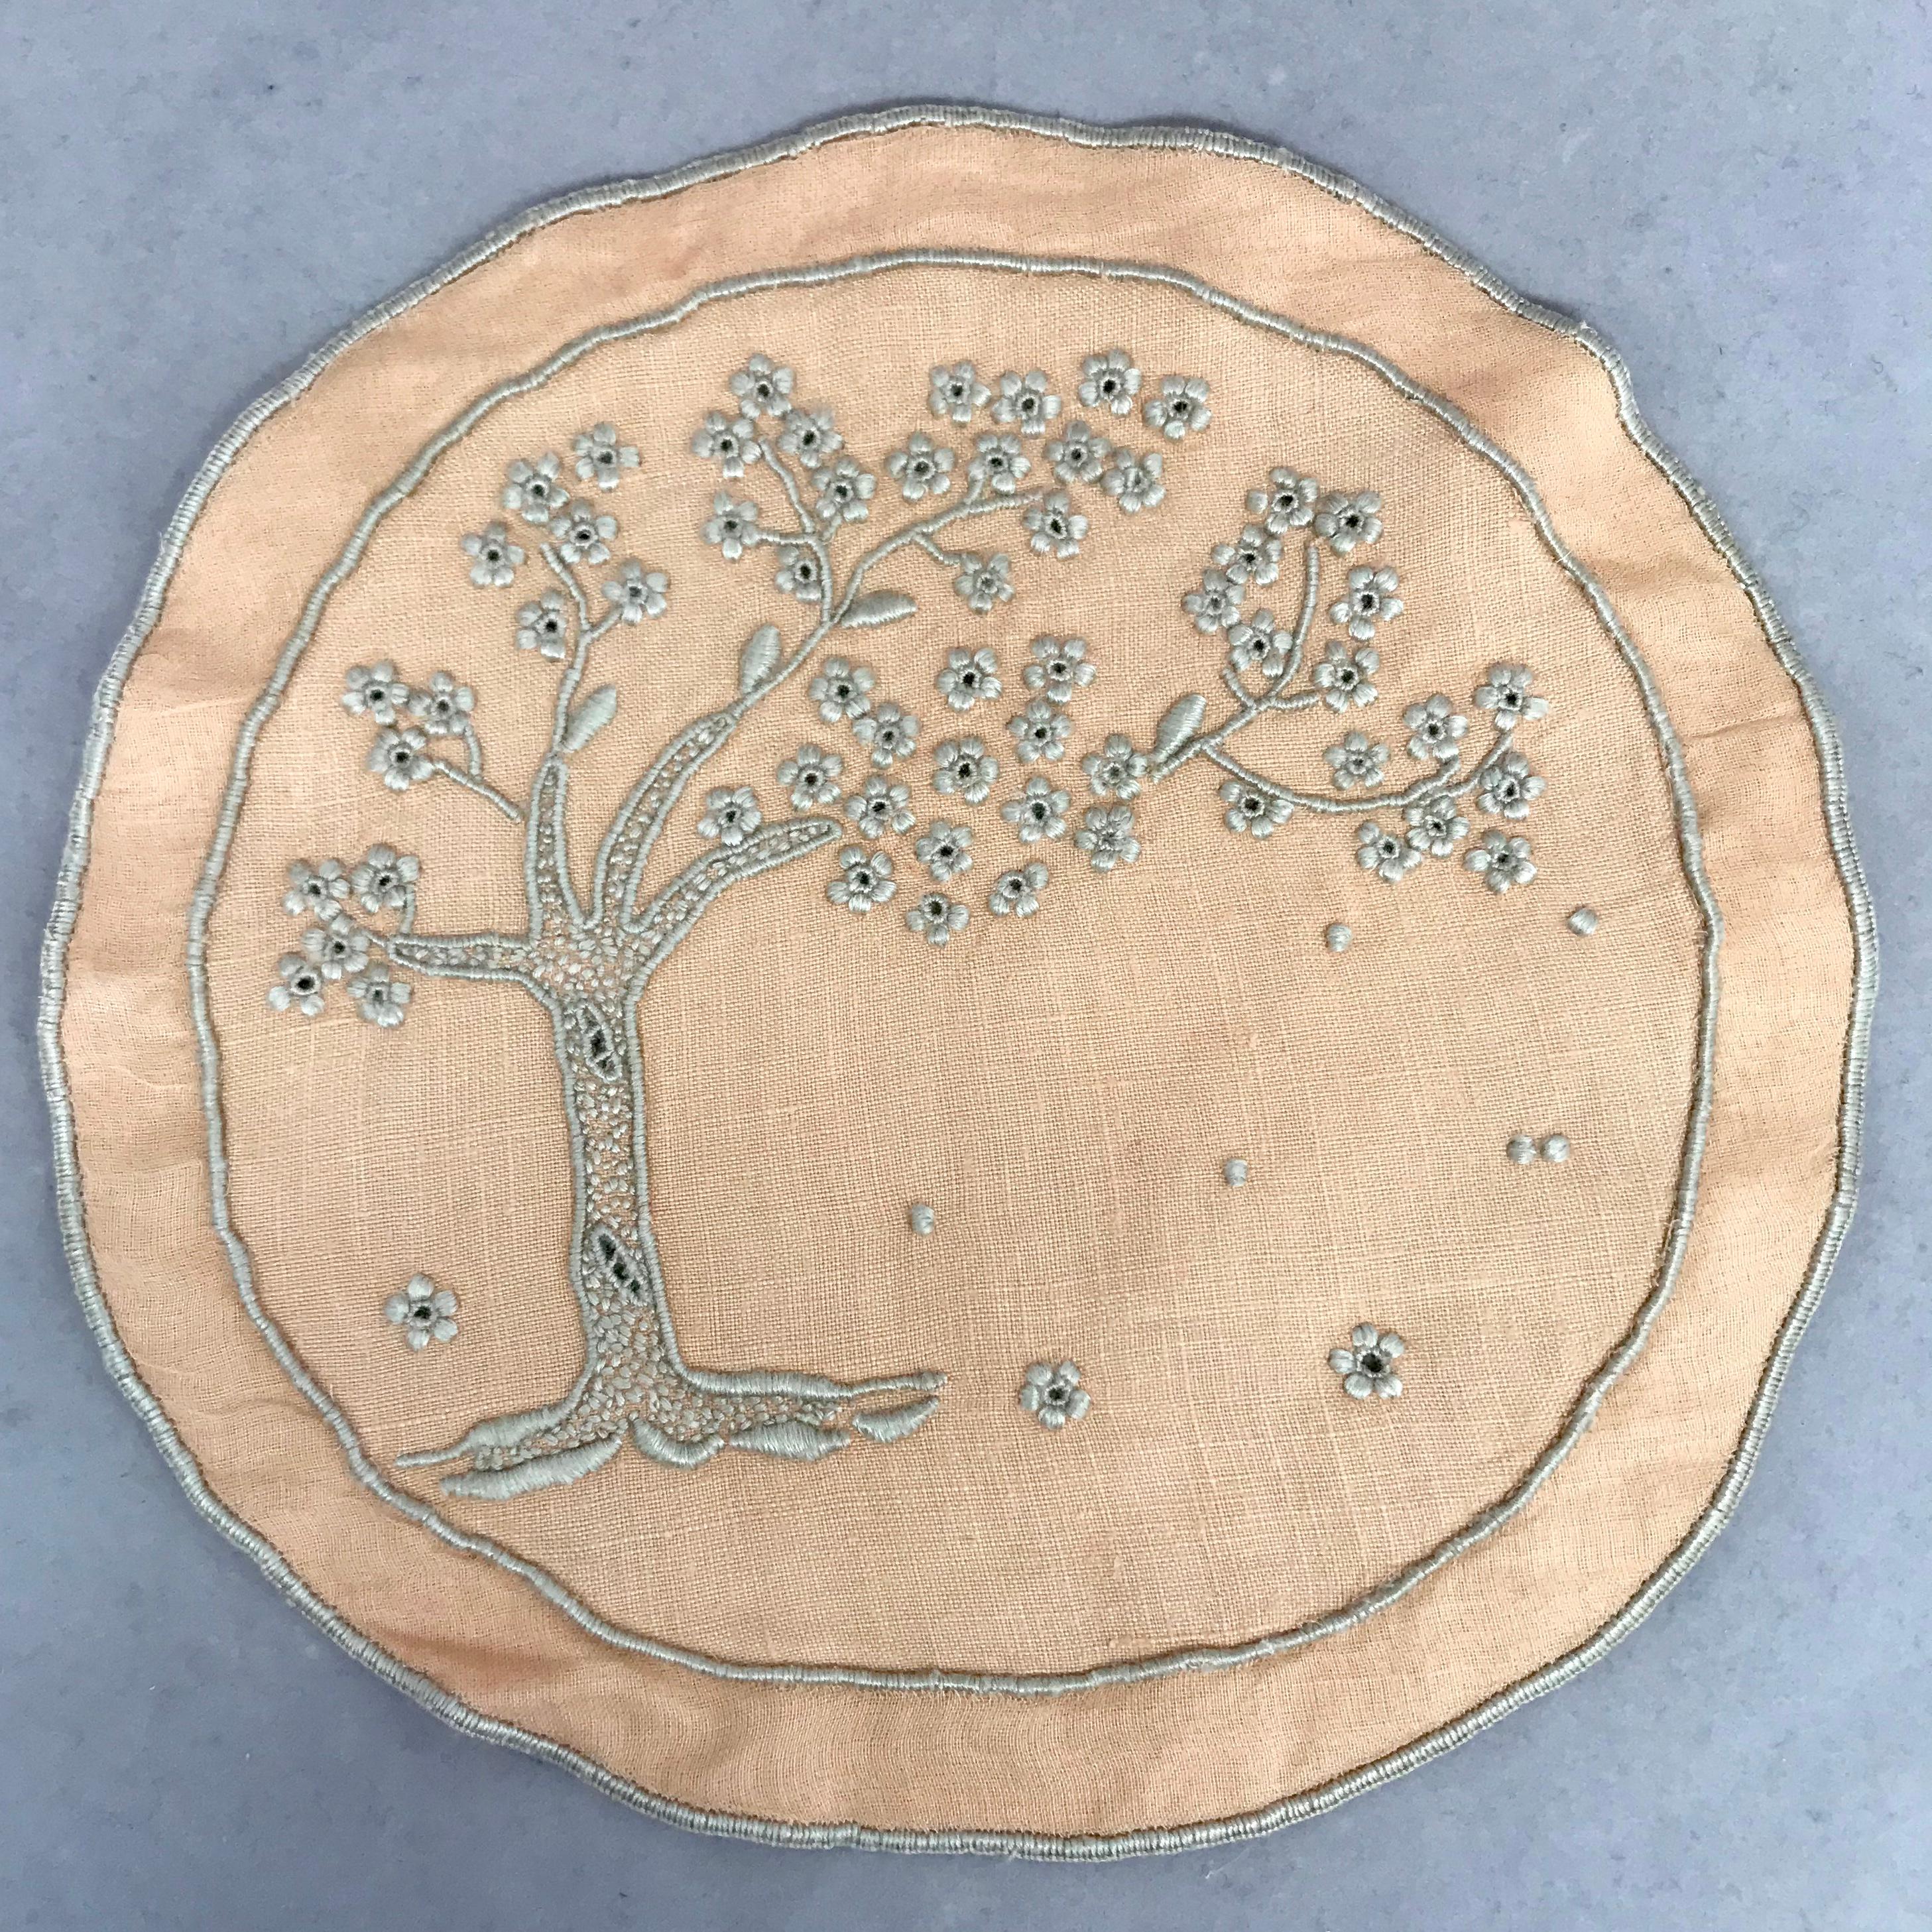 Set of ten embroidered tree of life coasters. Ten peach and oyster color embroidered large round coasters / doilies with large flowering tree, England, 1930s
Dimensions: 5.5